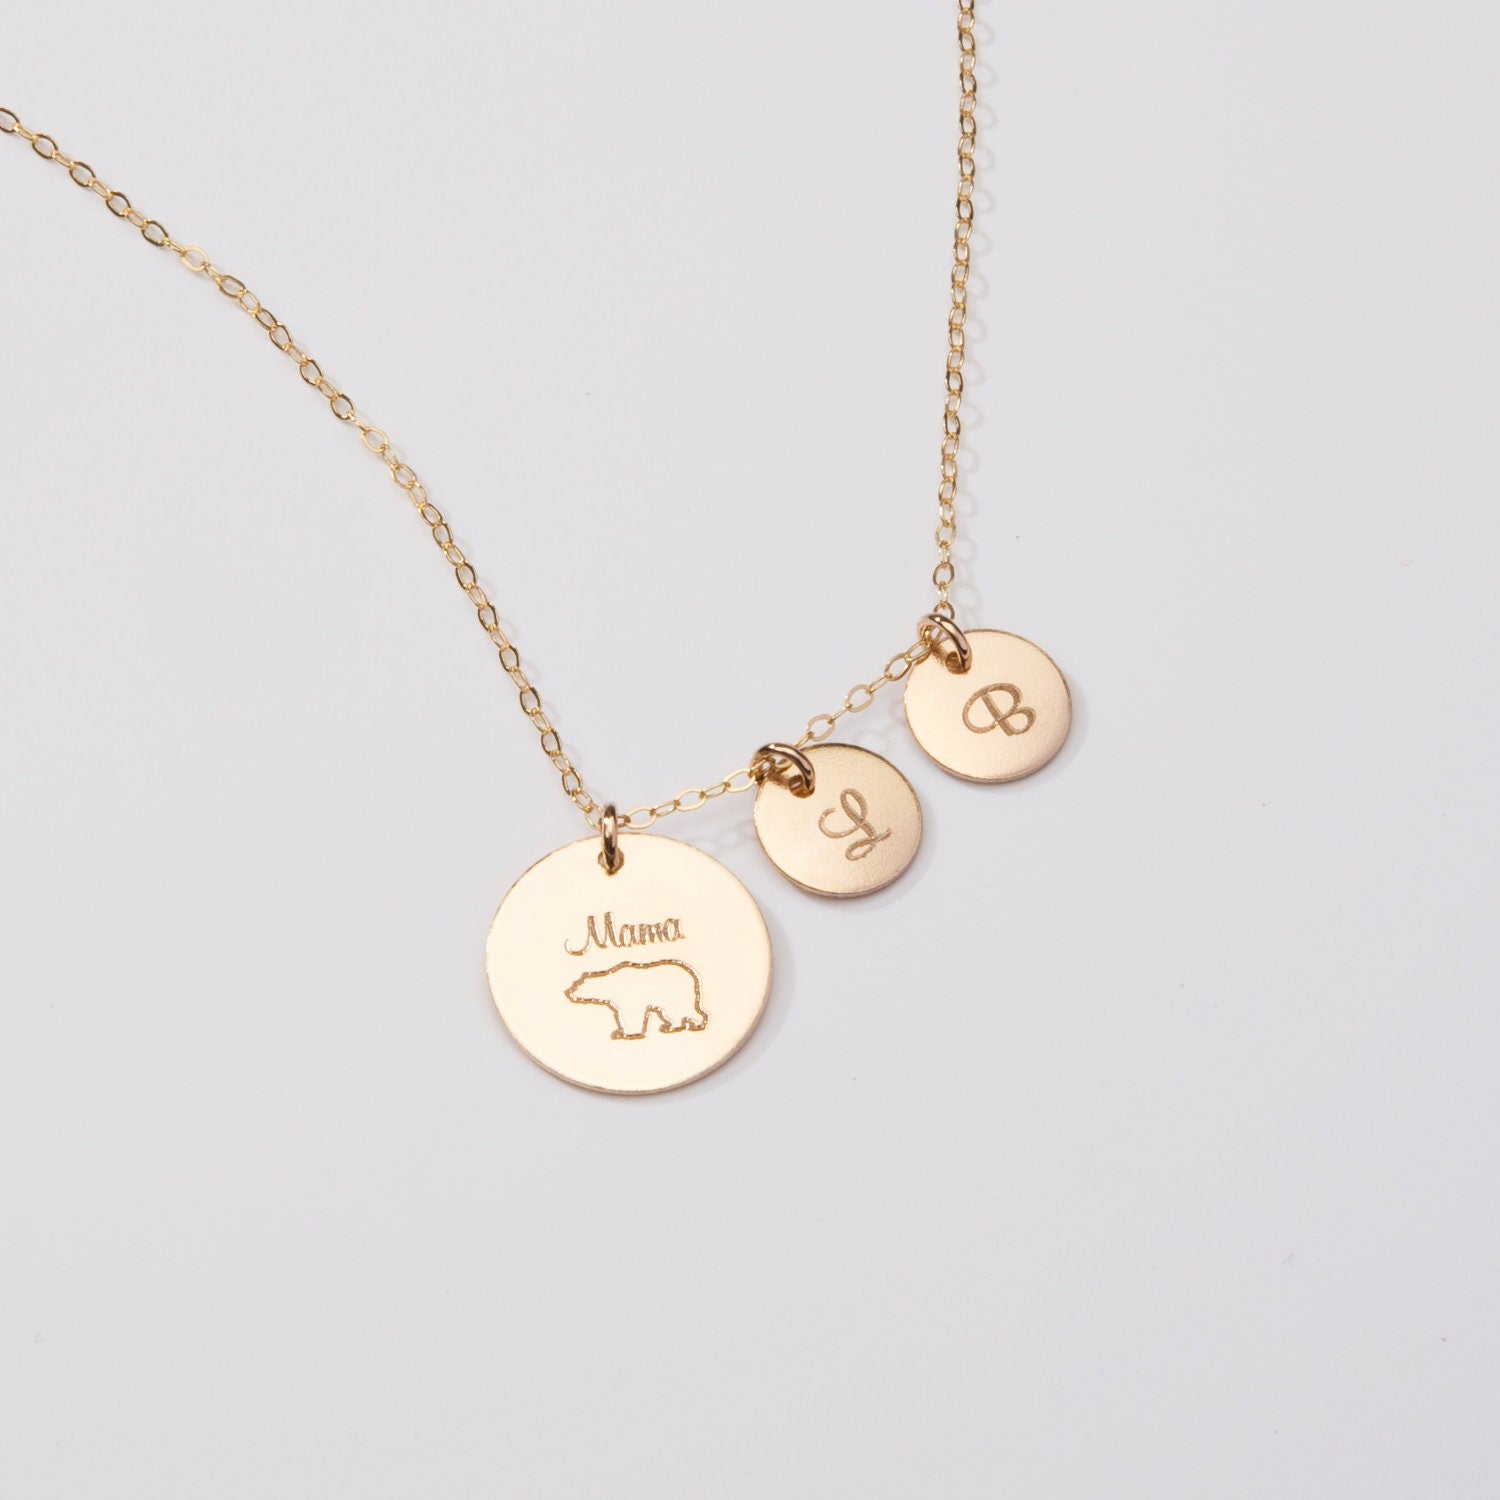 New Mom Necklace, Custom Kids Names, Birthstone Necklace, Bar Necklace, Children's  Initials, Mothers Gift, Gold, Silver, Rose Gold - Etsy | Mom necklace, Bar  necklace, Personalized necklace